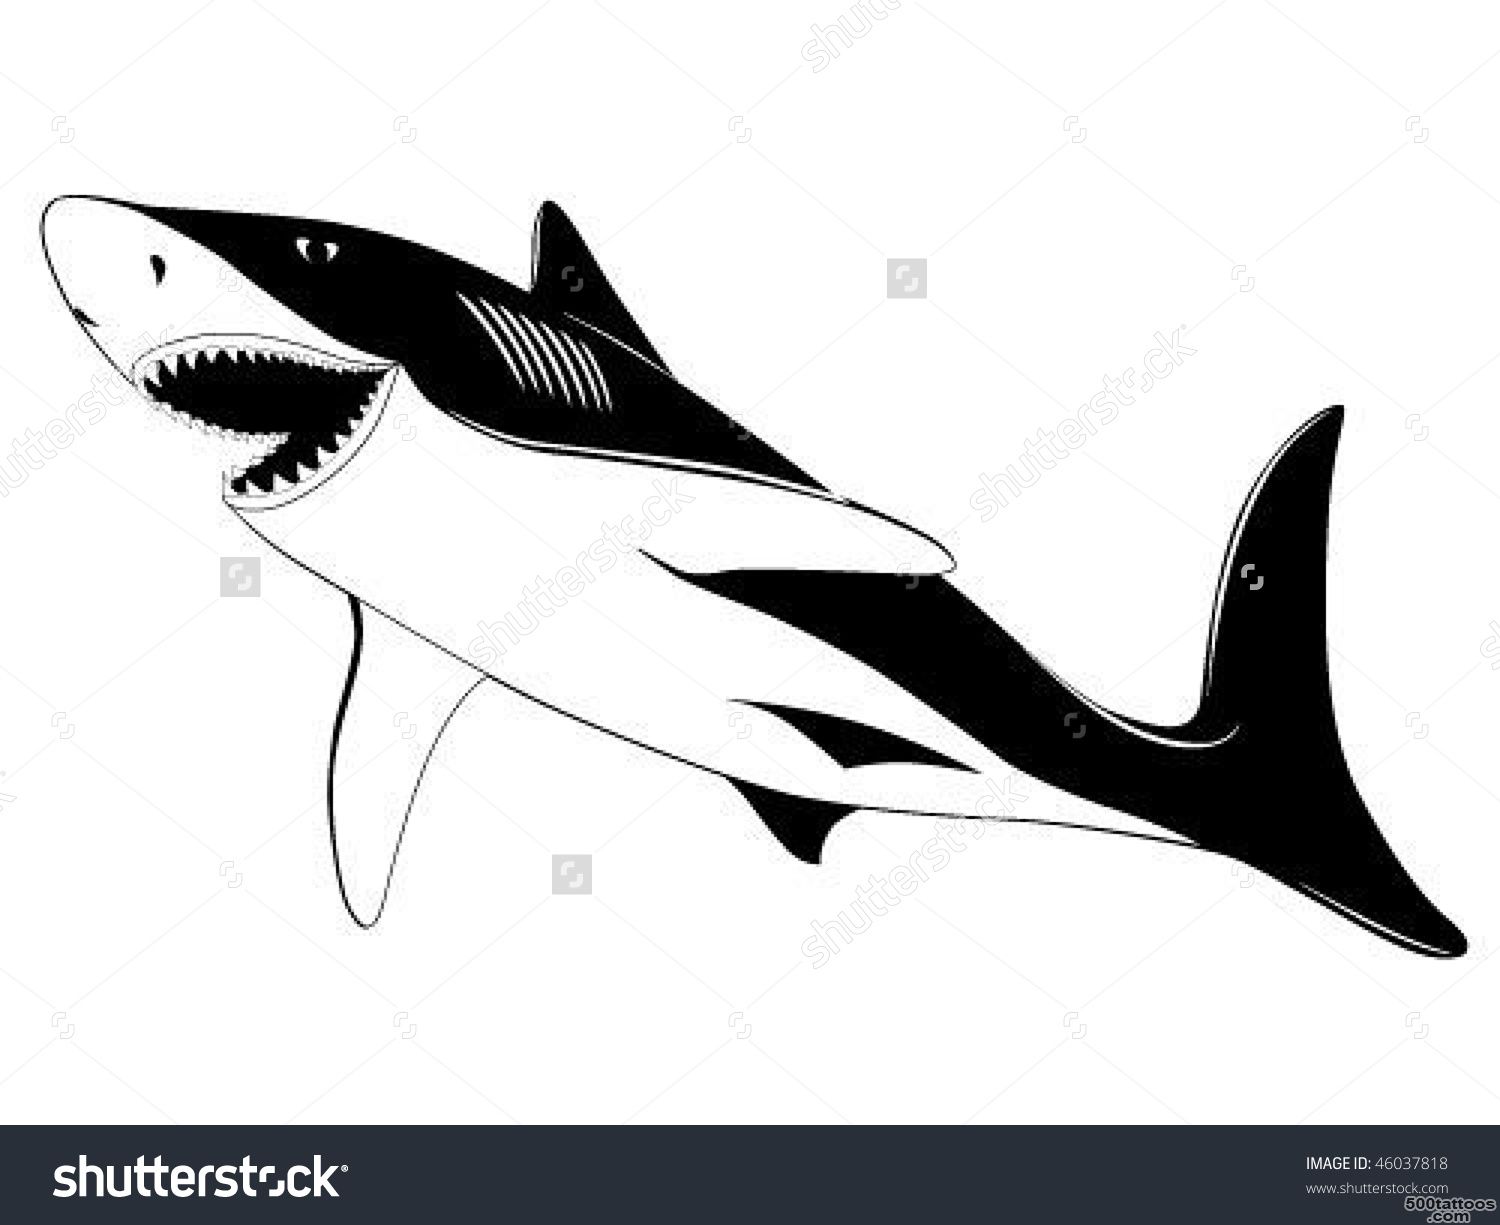 Black Shark Tattoo Stock Photos, Images, amp Pictures  Shutterstock_33